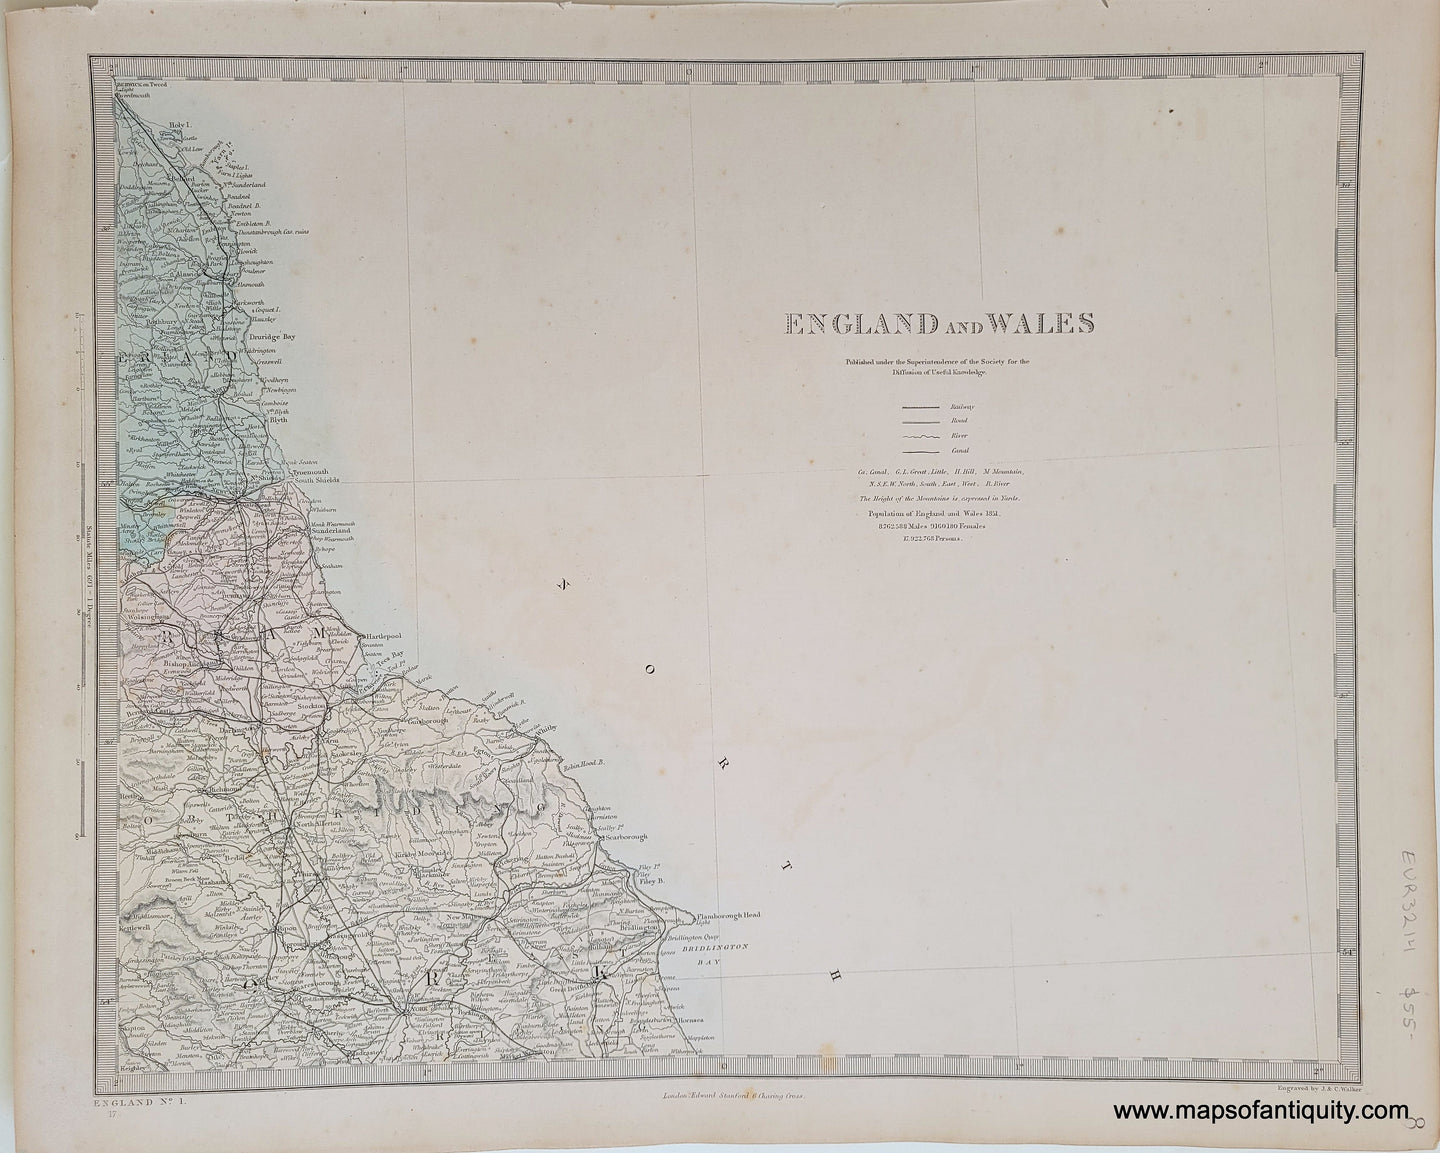 Genuine-Antique-Map-England-and-Wales-in-six-sheets-sheet-1-England-and-Wales--1860-SDUK-Society-for-the-Diffusion-of-Useful-Knowledge-Maps-Of-Antiquity-1800s-19th-century